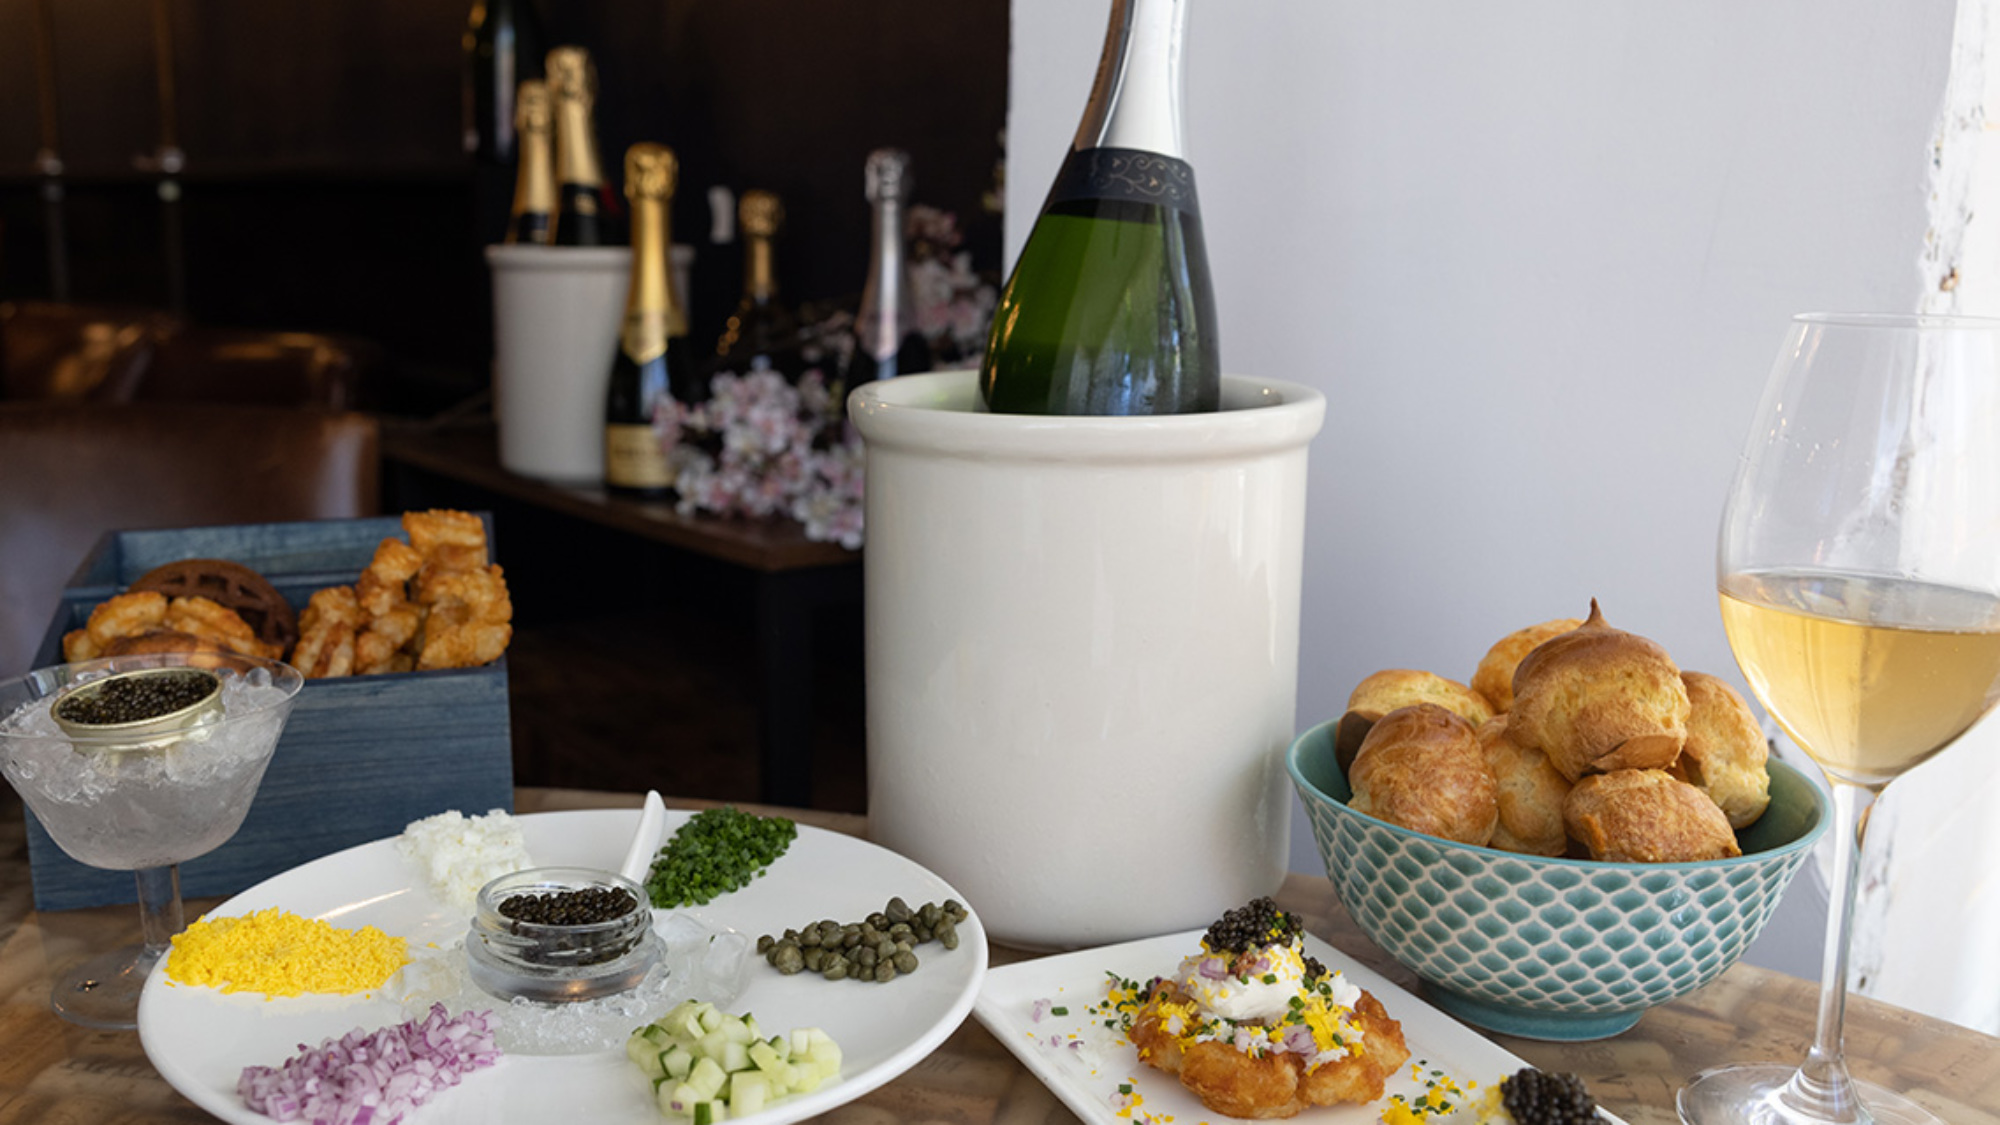 Go long on Champagne and caviar at Apéro. // Courtesy of Apéro DC; photo by Corbin Goldstein